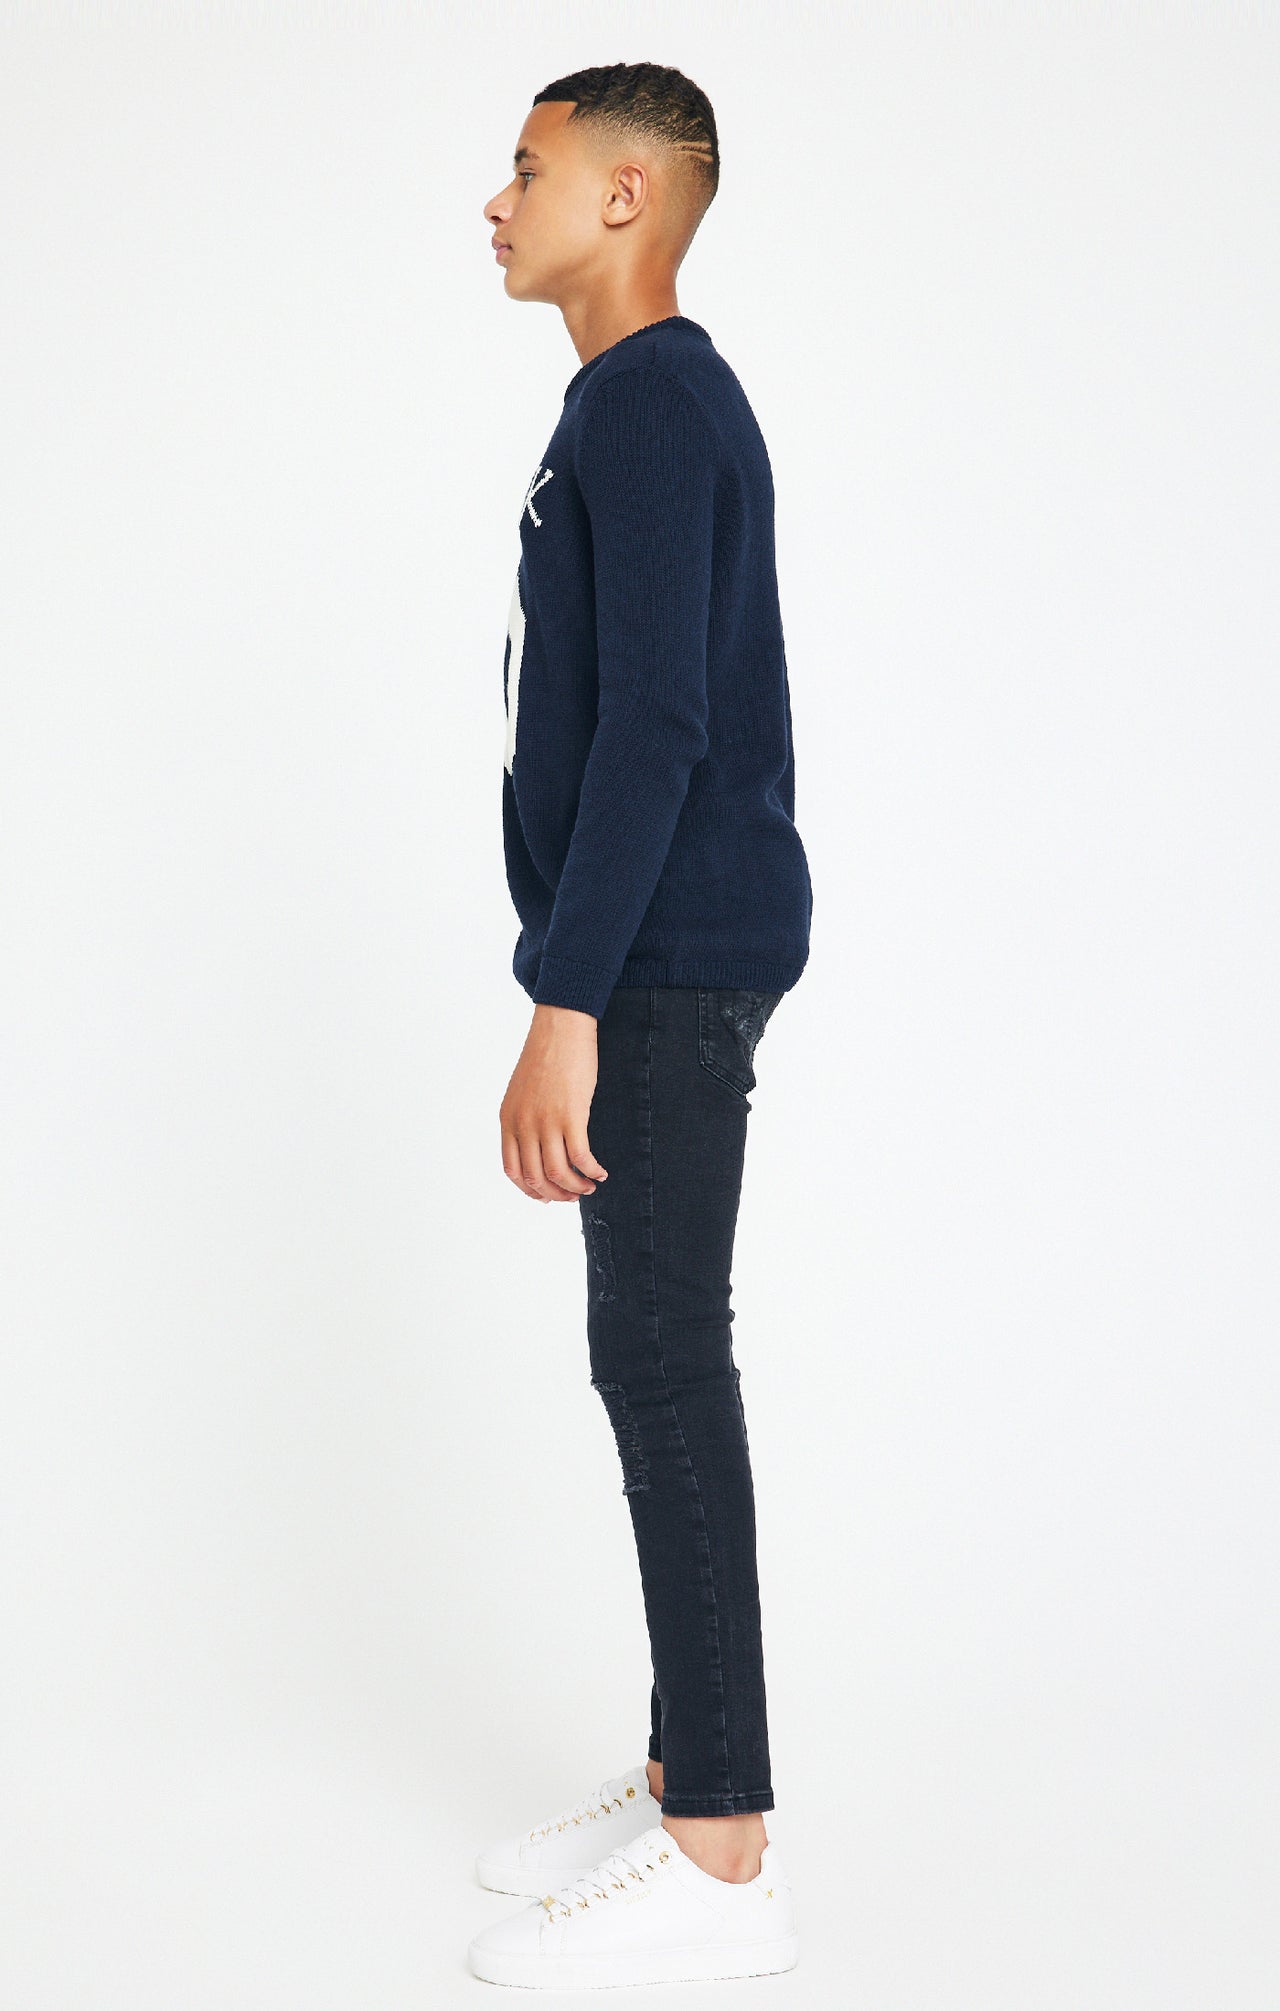 Boys Messi x SikSilk Navy Knitted Jumper (4)